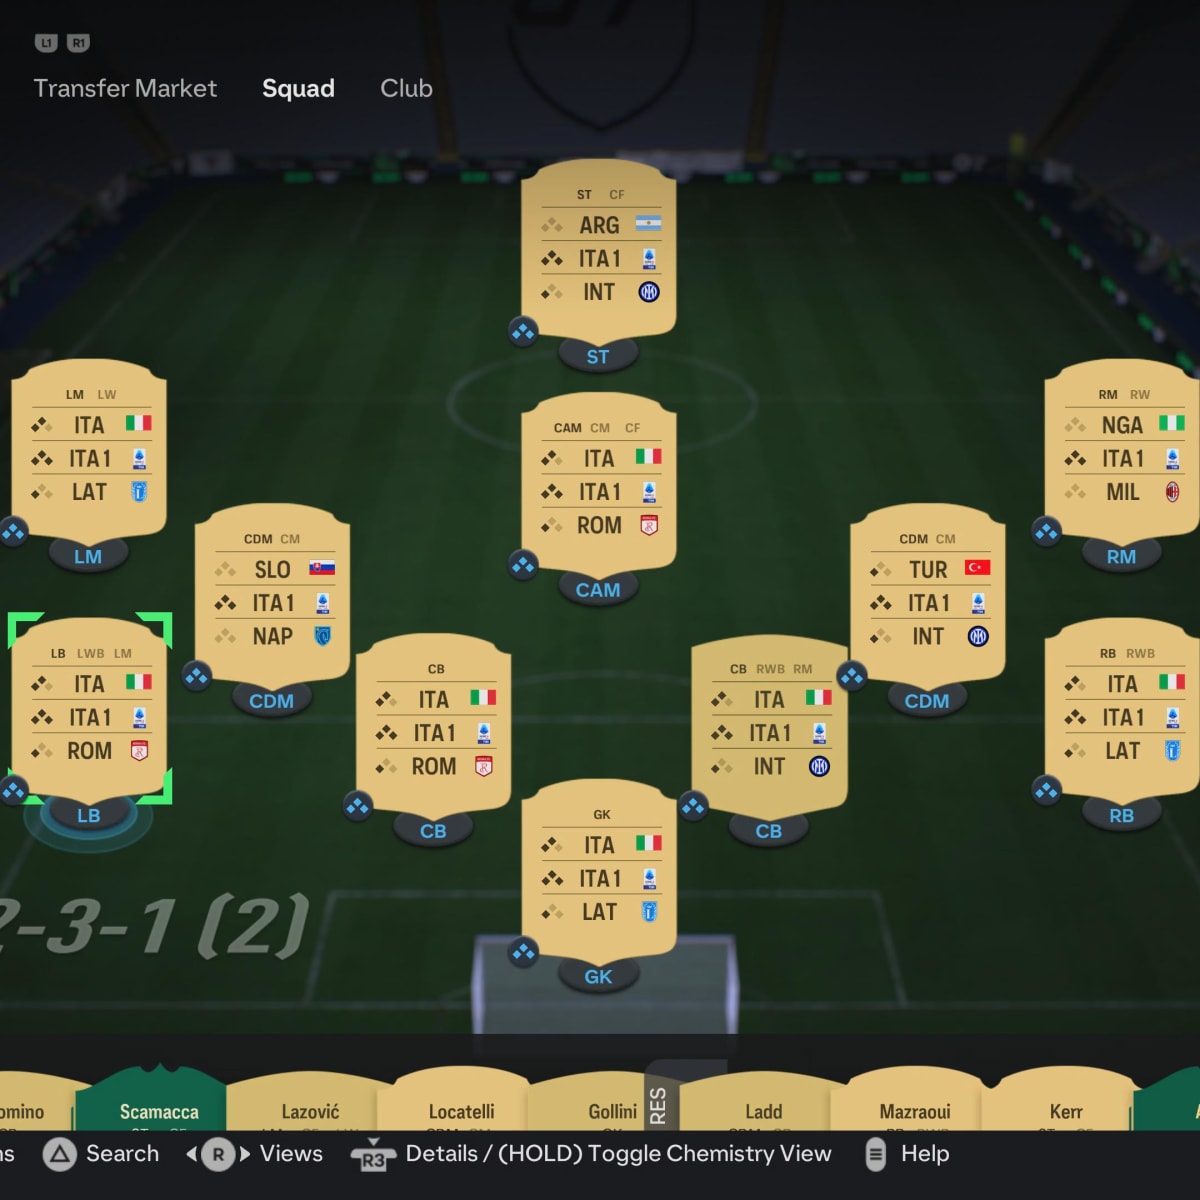 EA FC 24 Web App: How to start your Ultimate Team early - Dot Esports